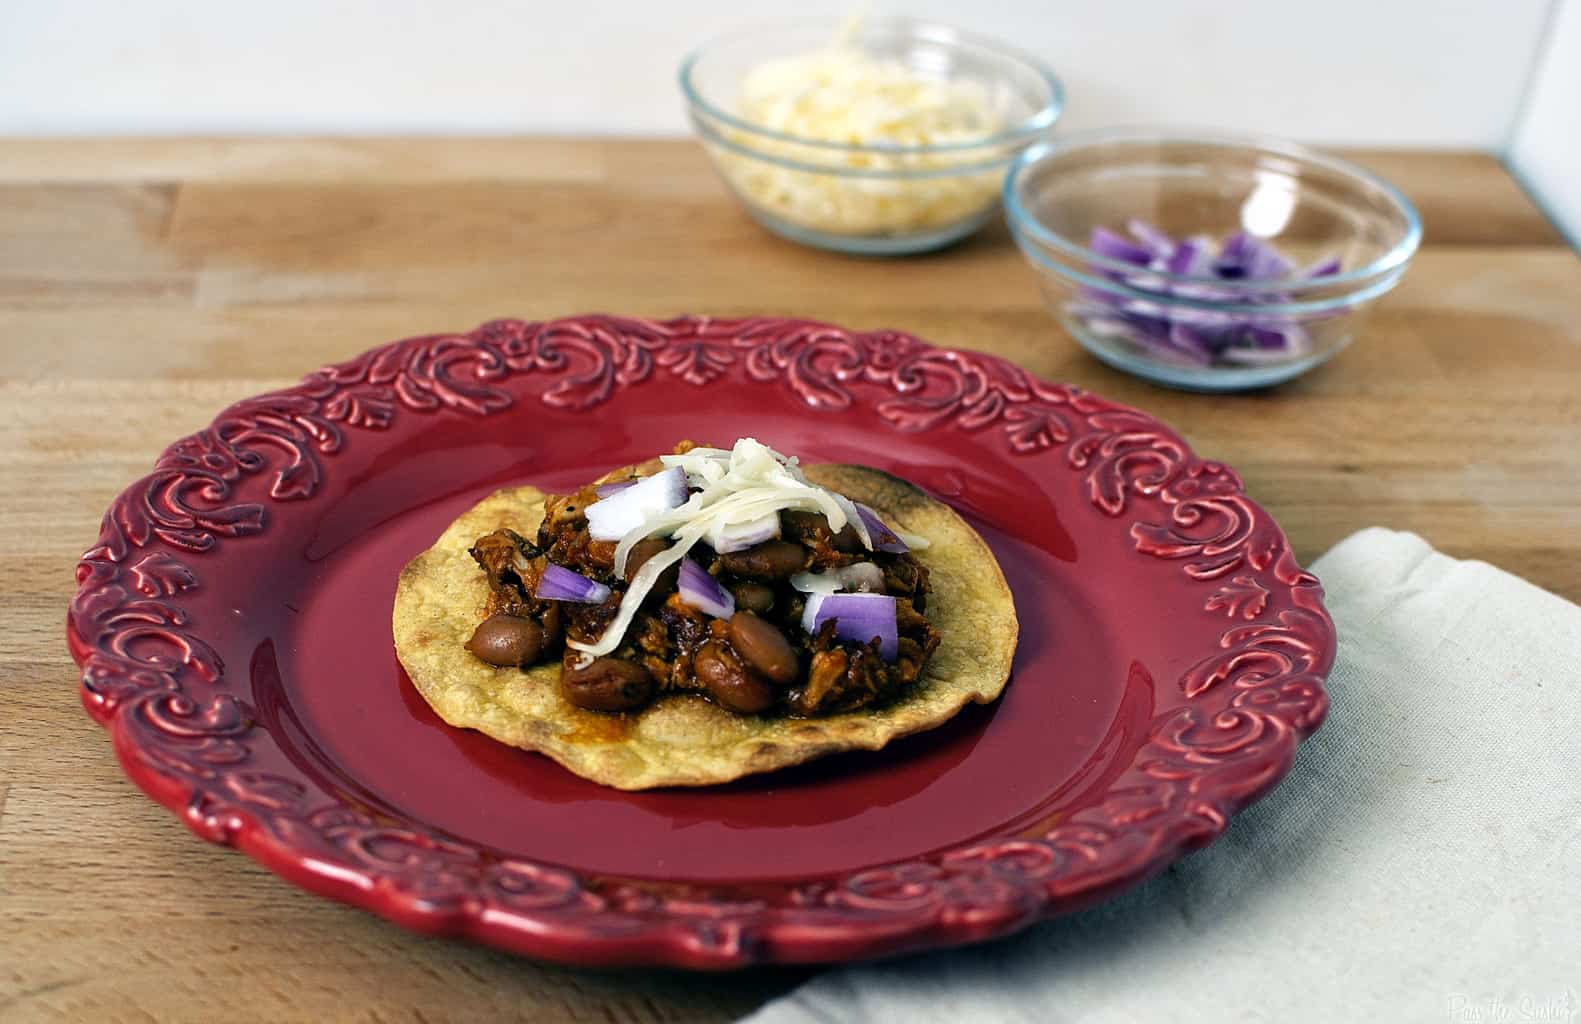 Pork tinga is a Mexican tostada dish made with flavorful shredded pork. It's an easy to prepare, hearty, and filling comfort food dinner. \\ PassTheSushi.com